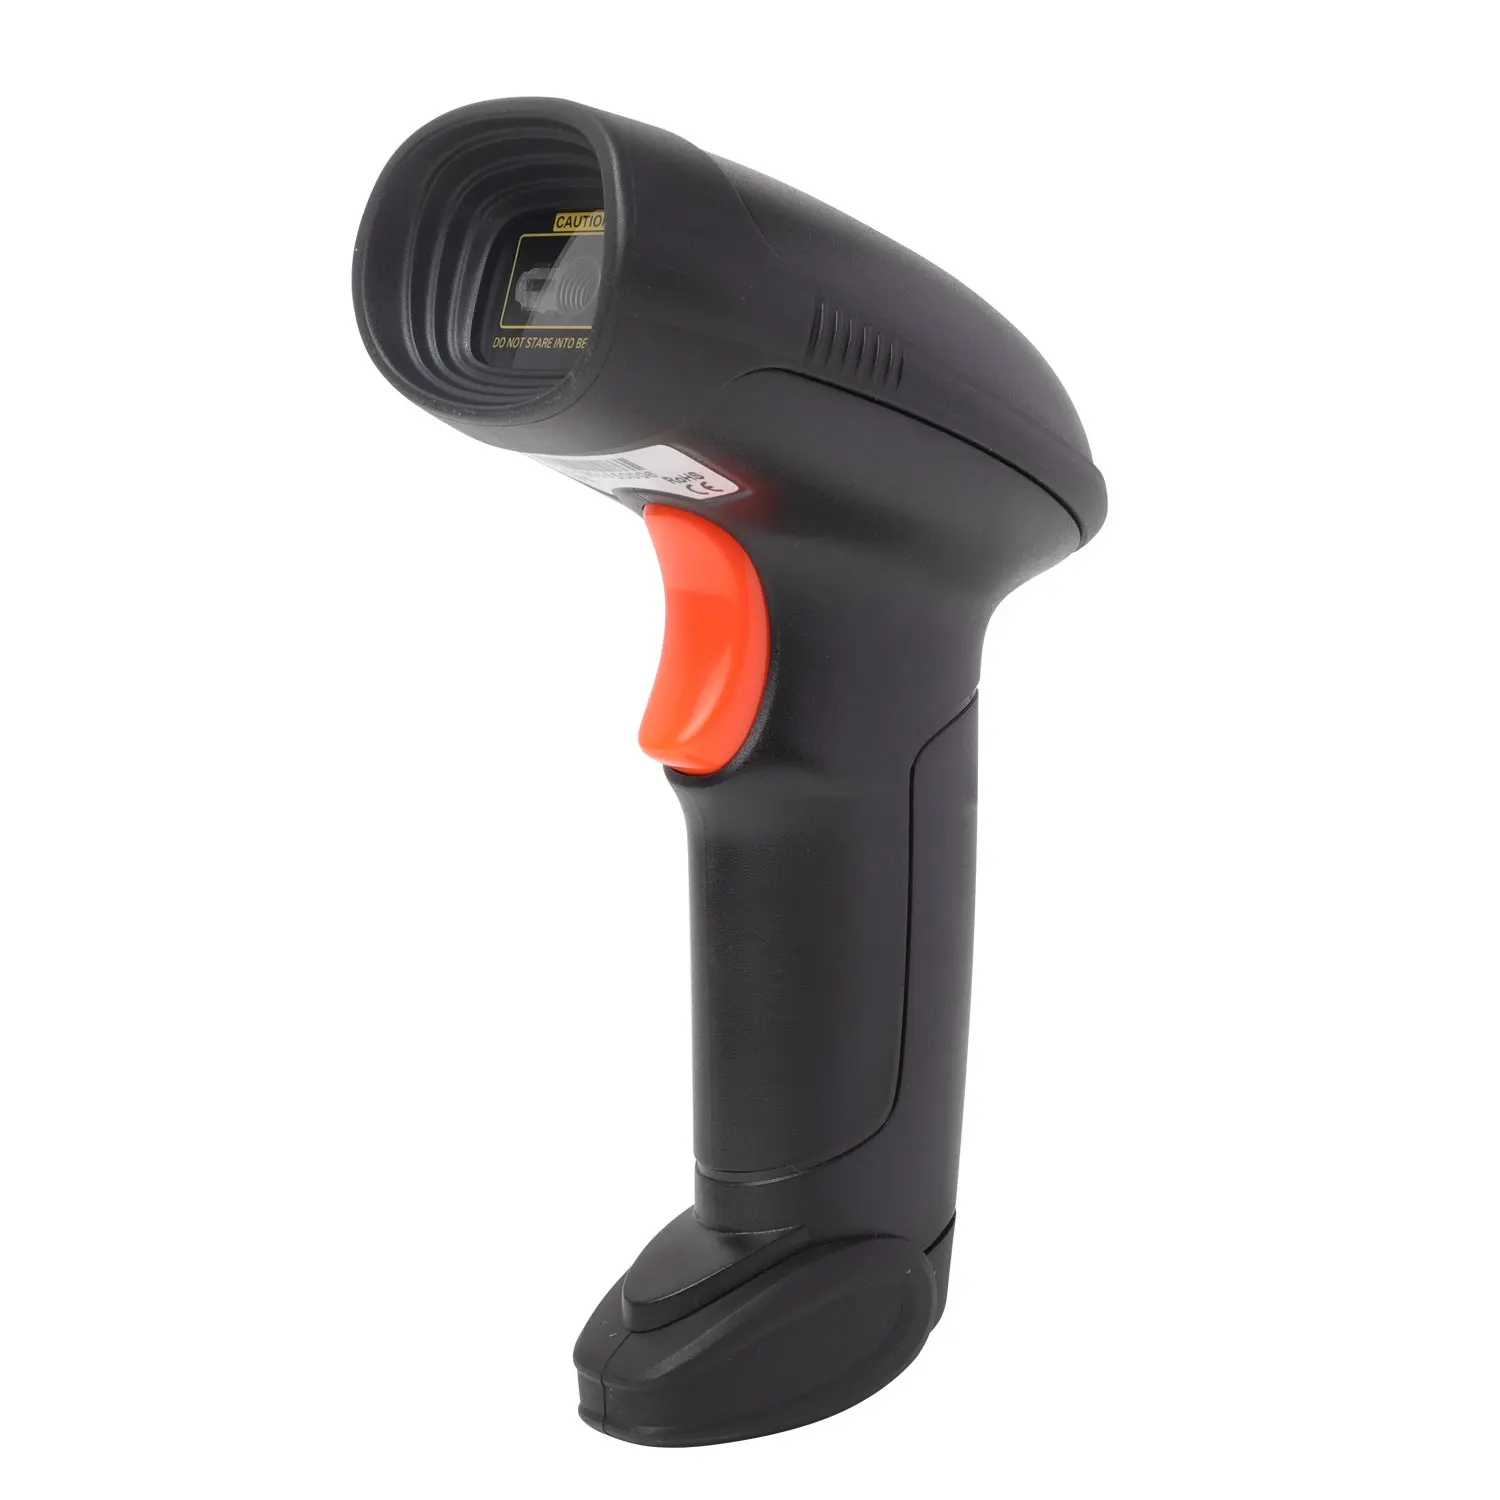 

A-9295 2D CMOS Idusrrial Barcode Scanner Black Portable Laser High Speed Handheld USB Wired Bar OR Code Reader For POS System